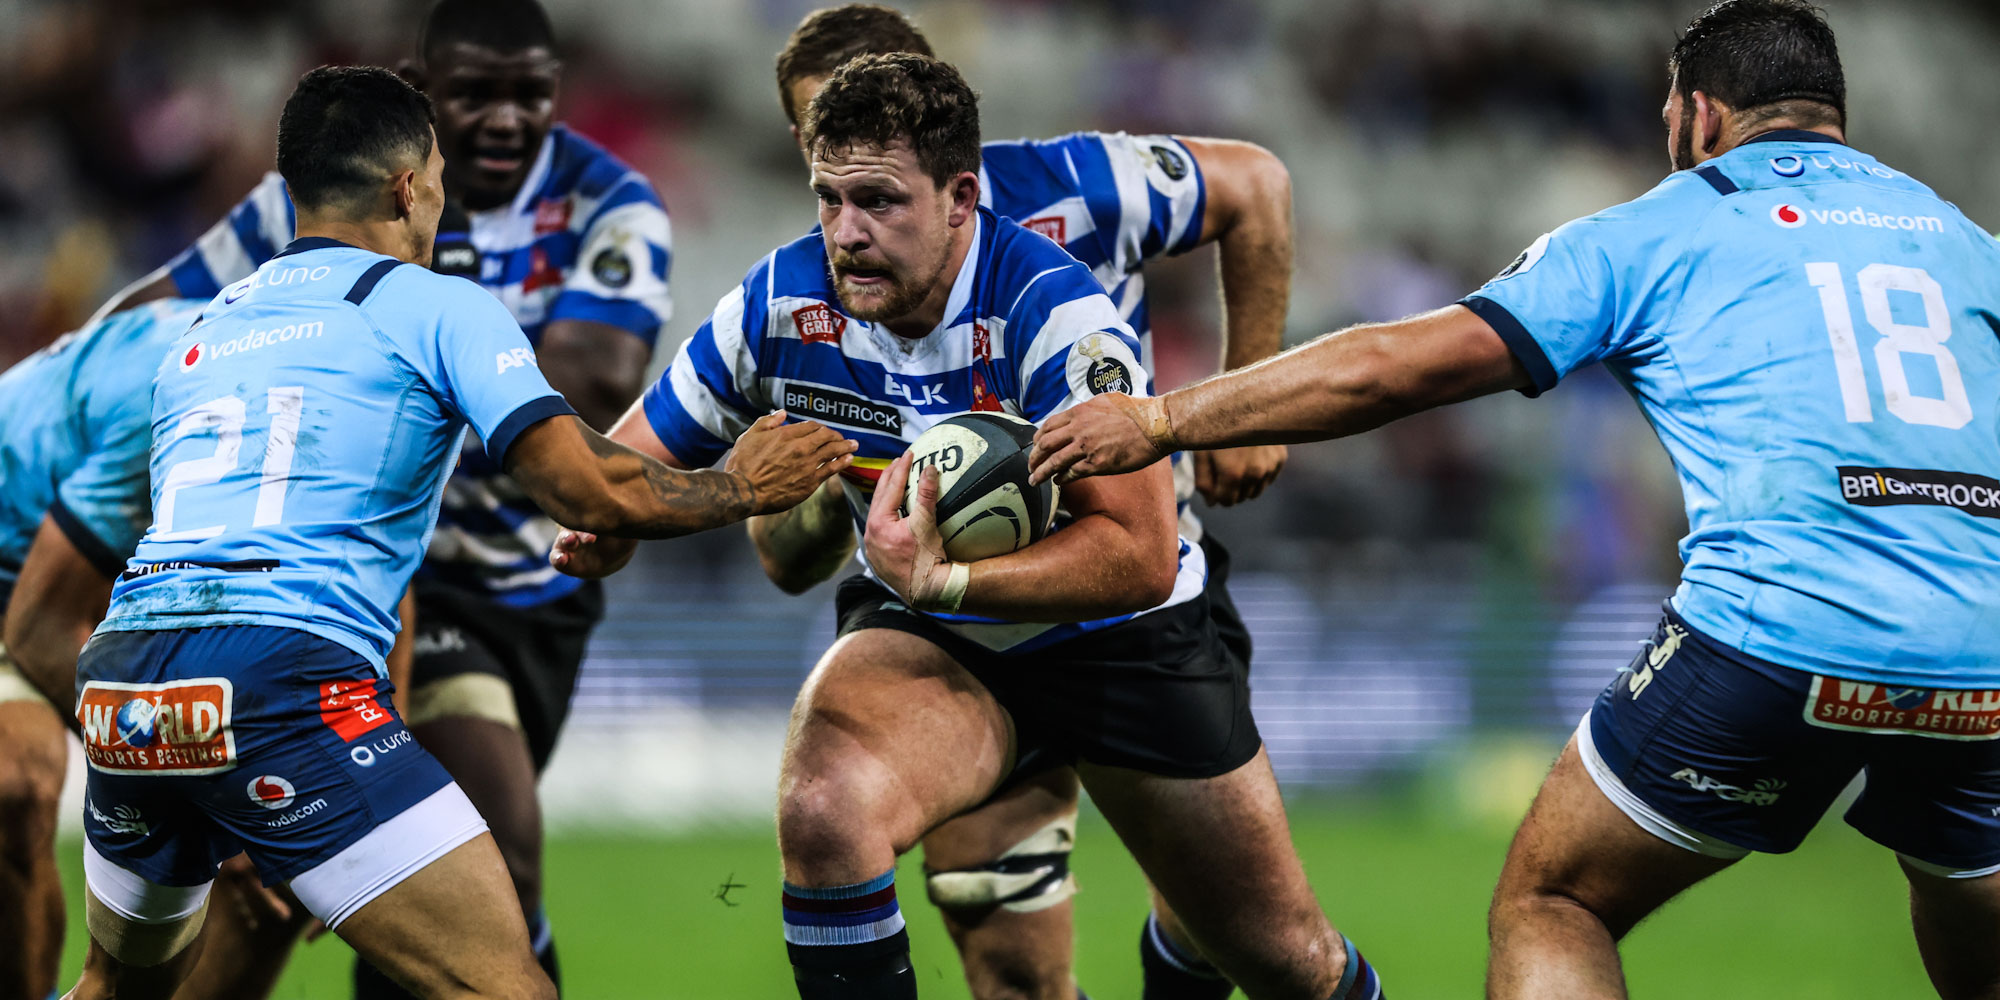 Andre-Hugo Venter on the charge for DHL WP.